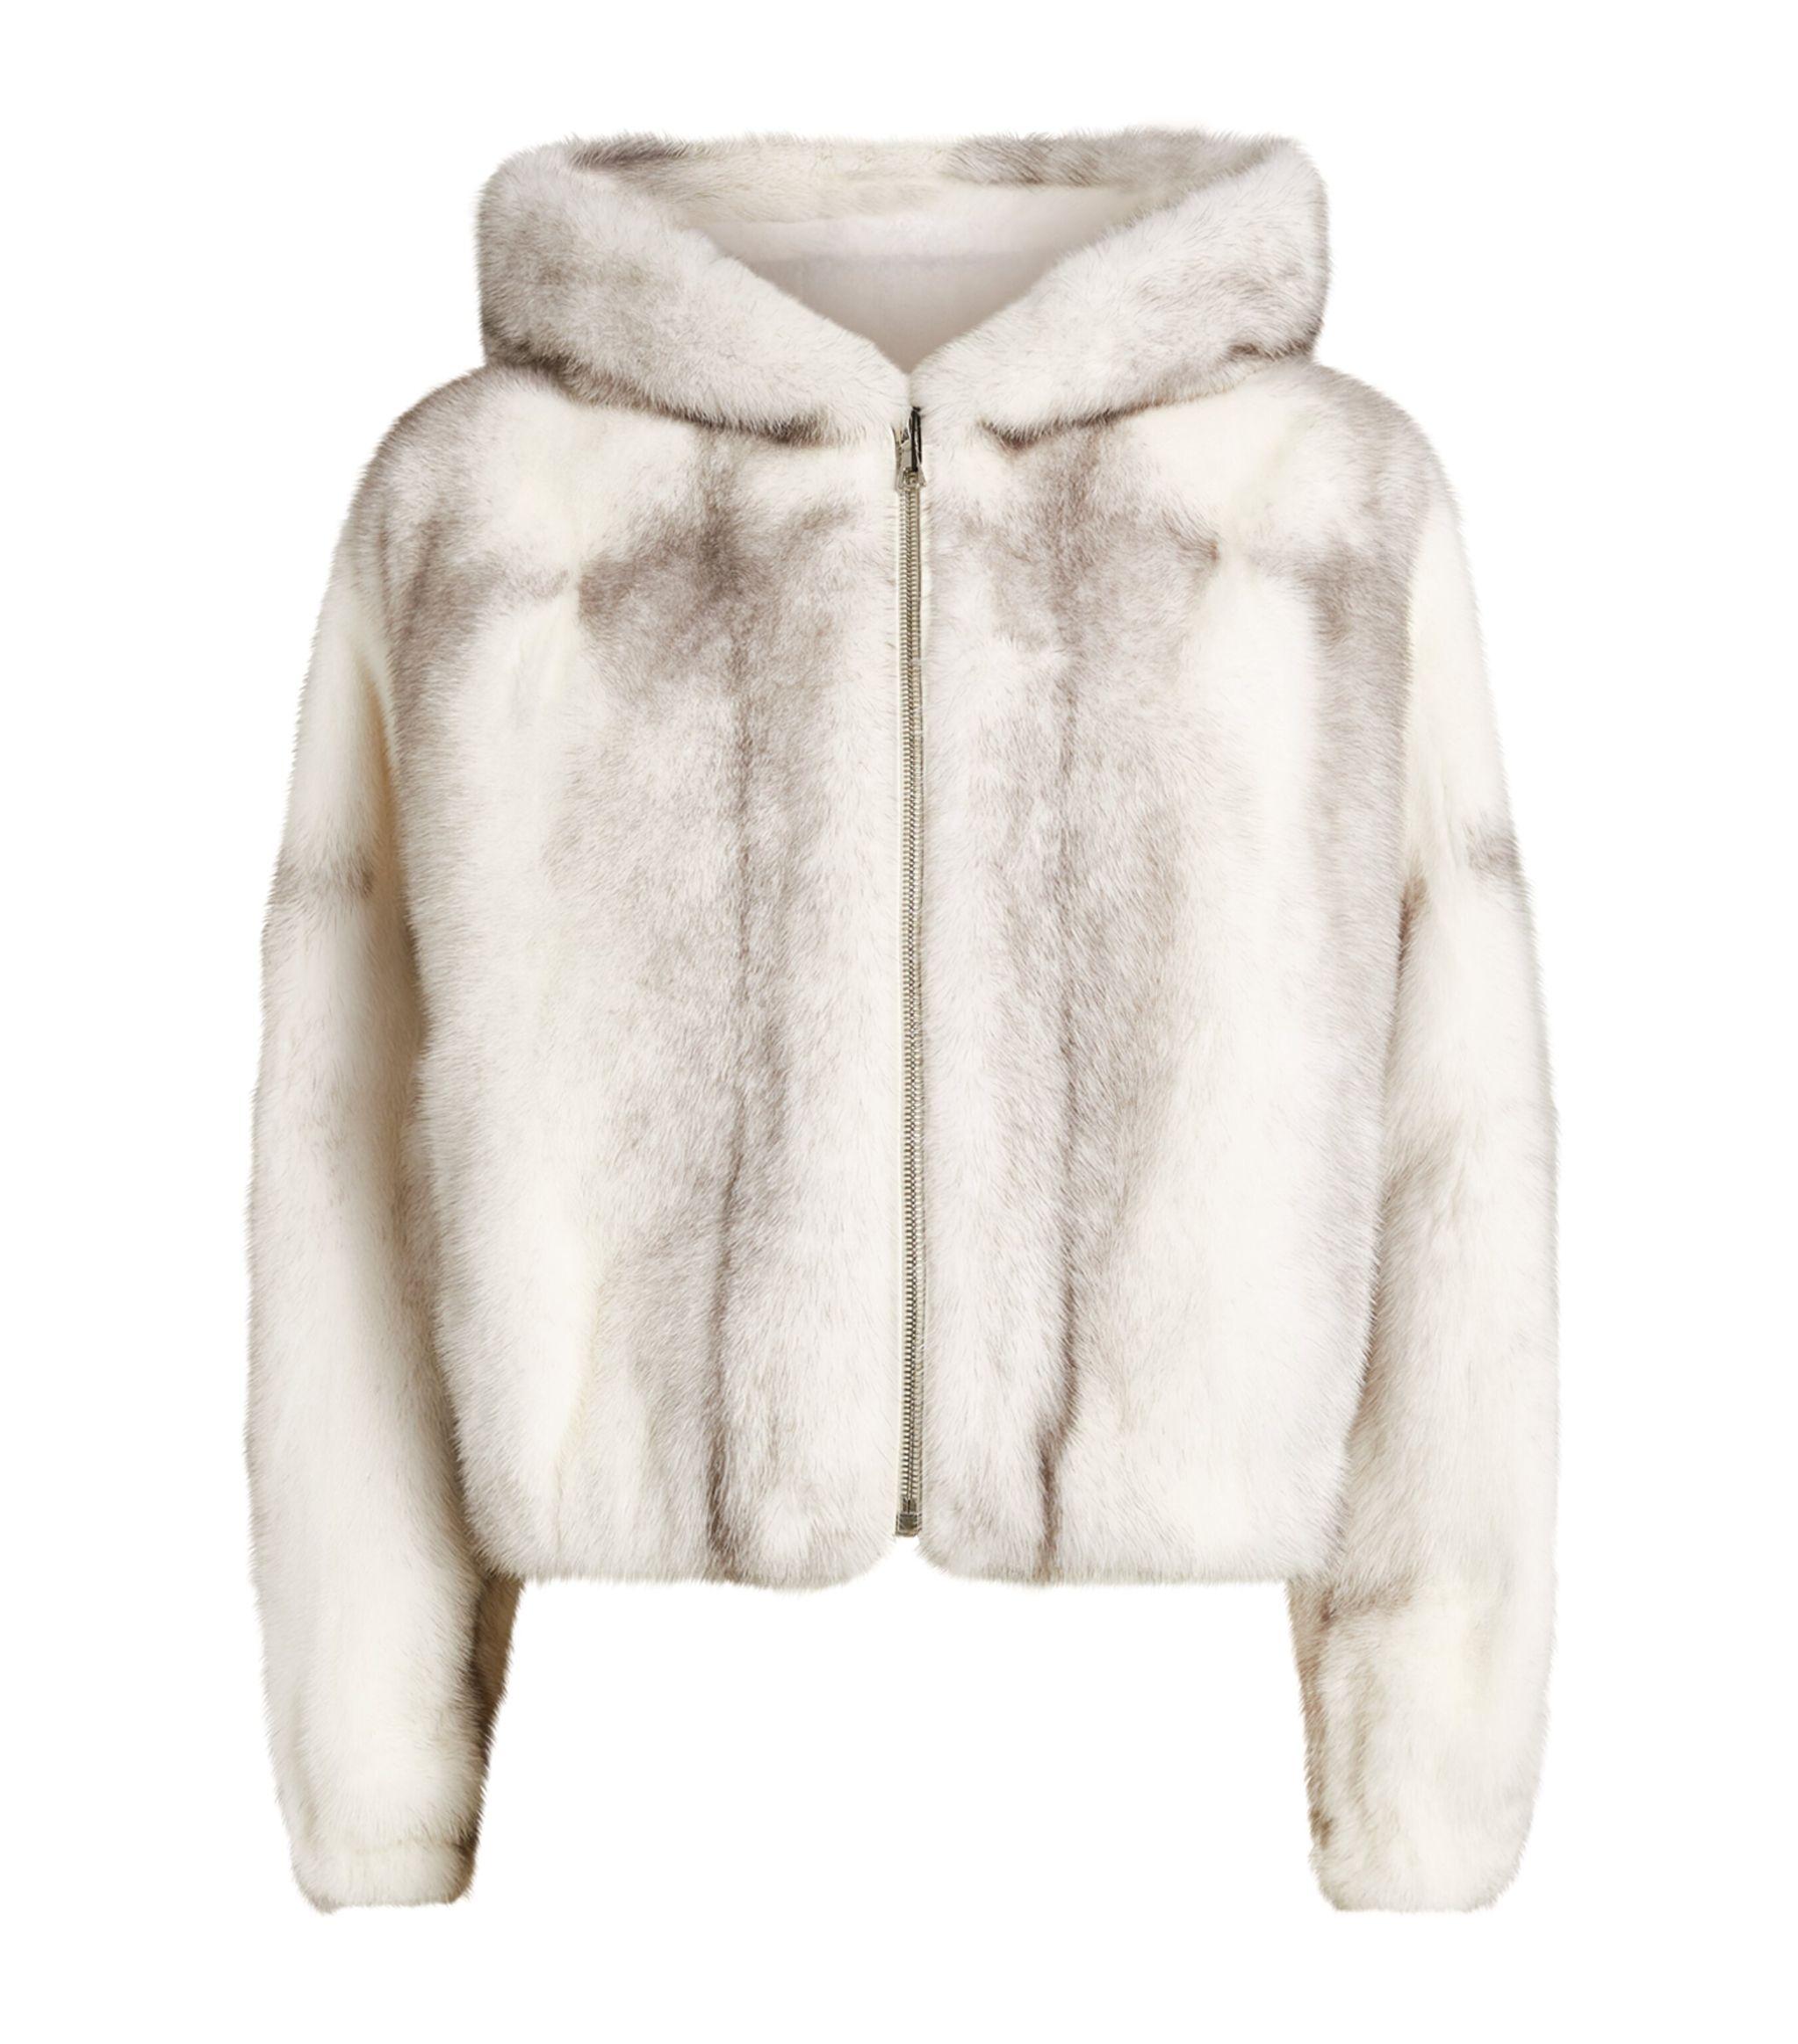 White Fur jackets for Women